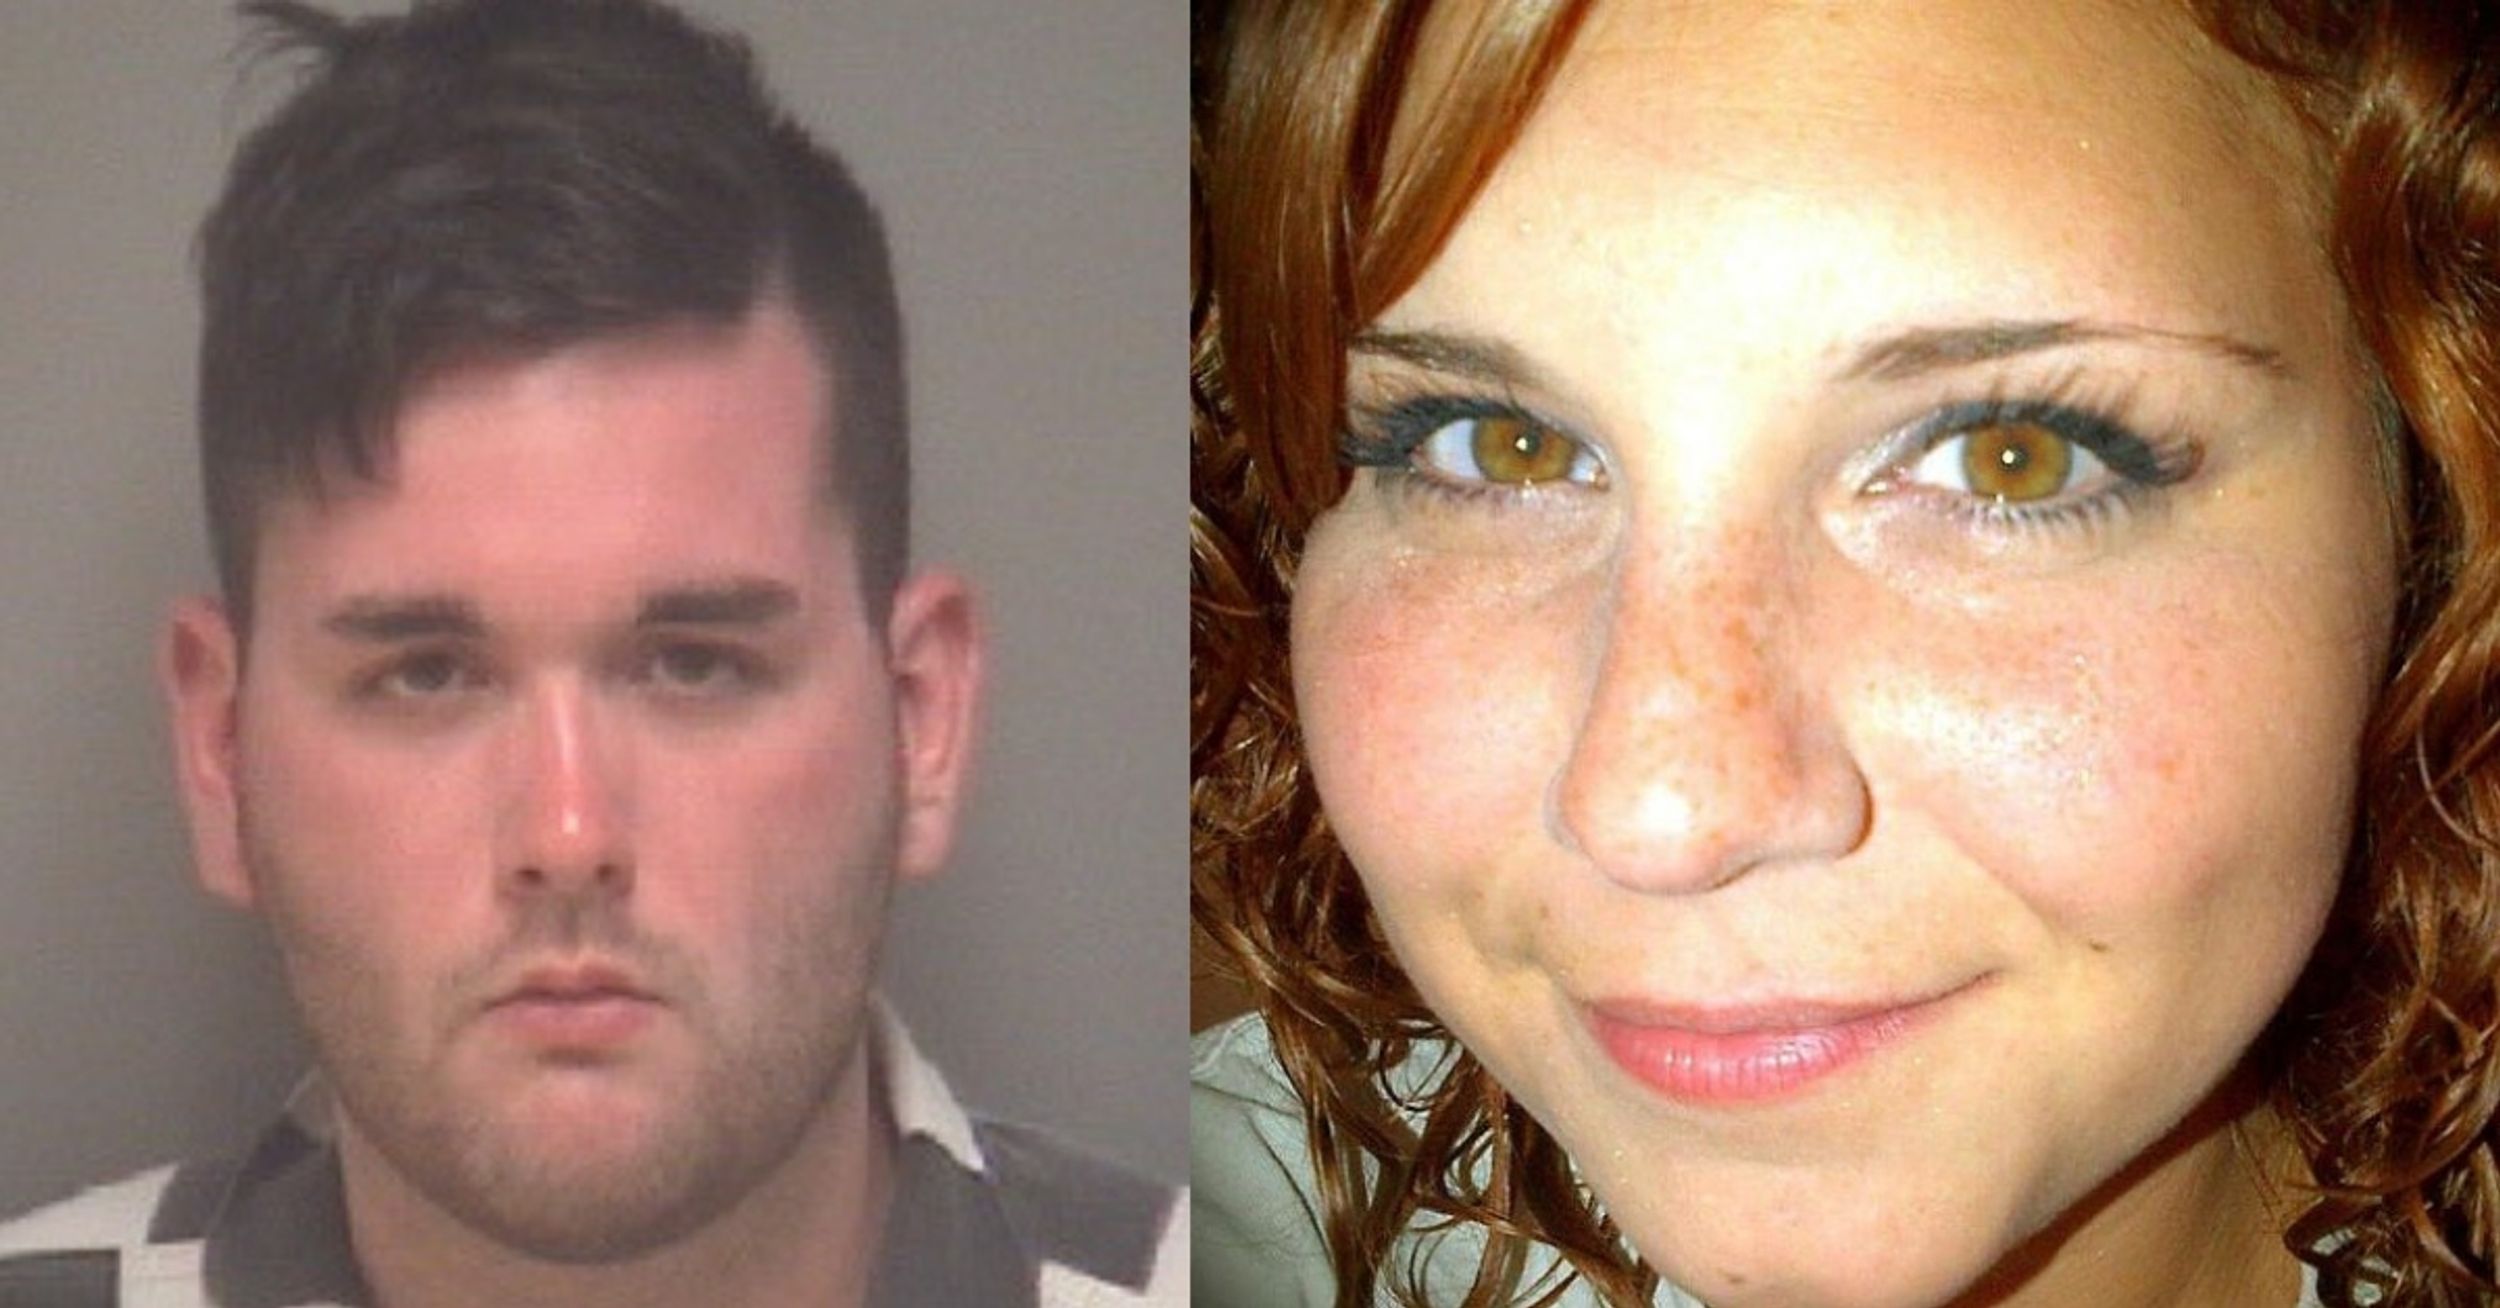 Jury Recommends Massive Prison Sentence For Charlottesville Neo-Nazi Accused Of Killing Heather Heyer